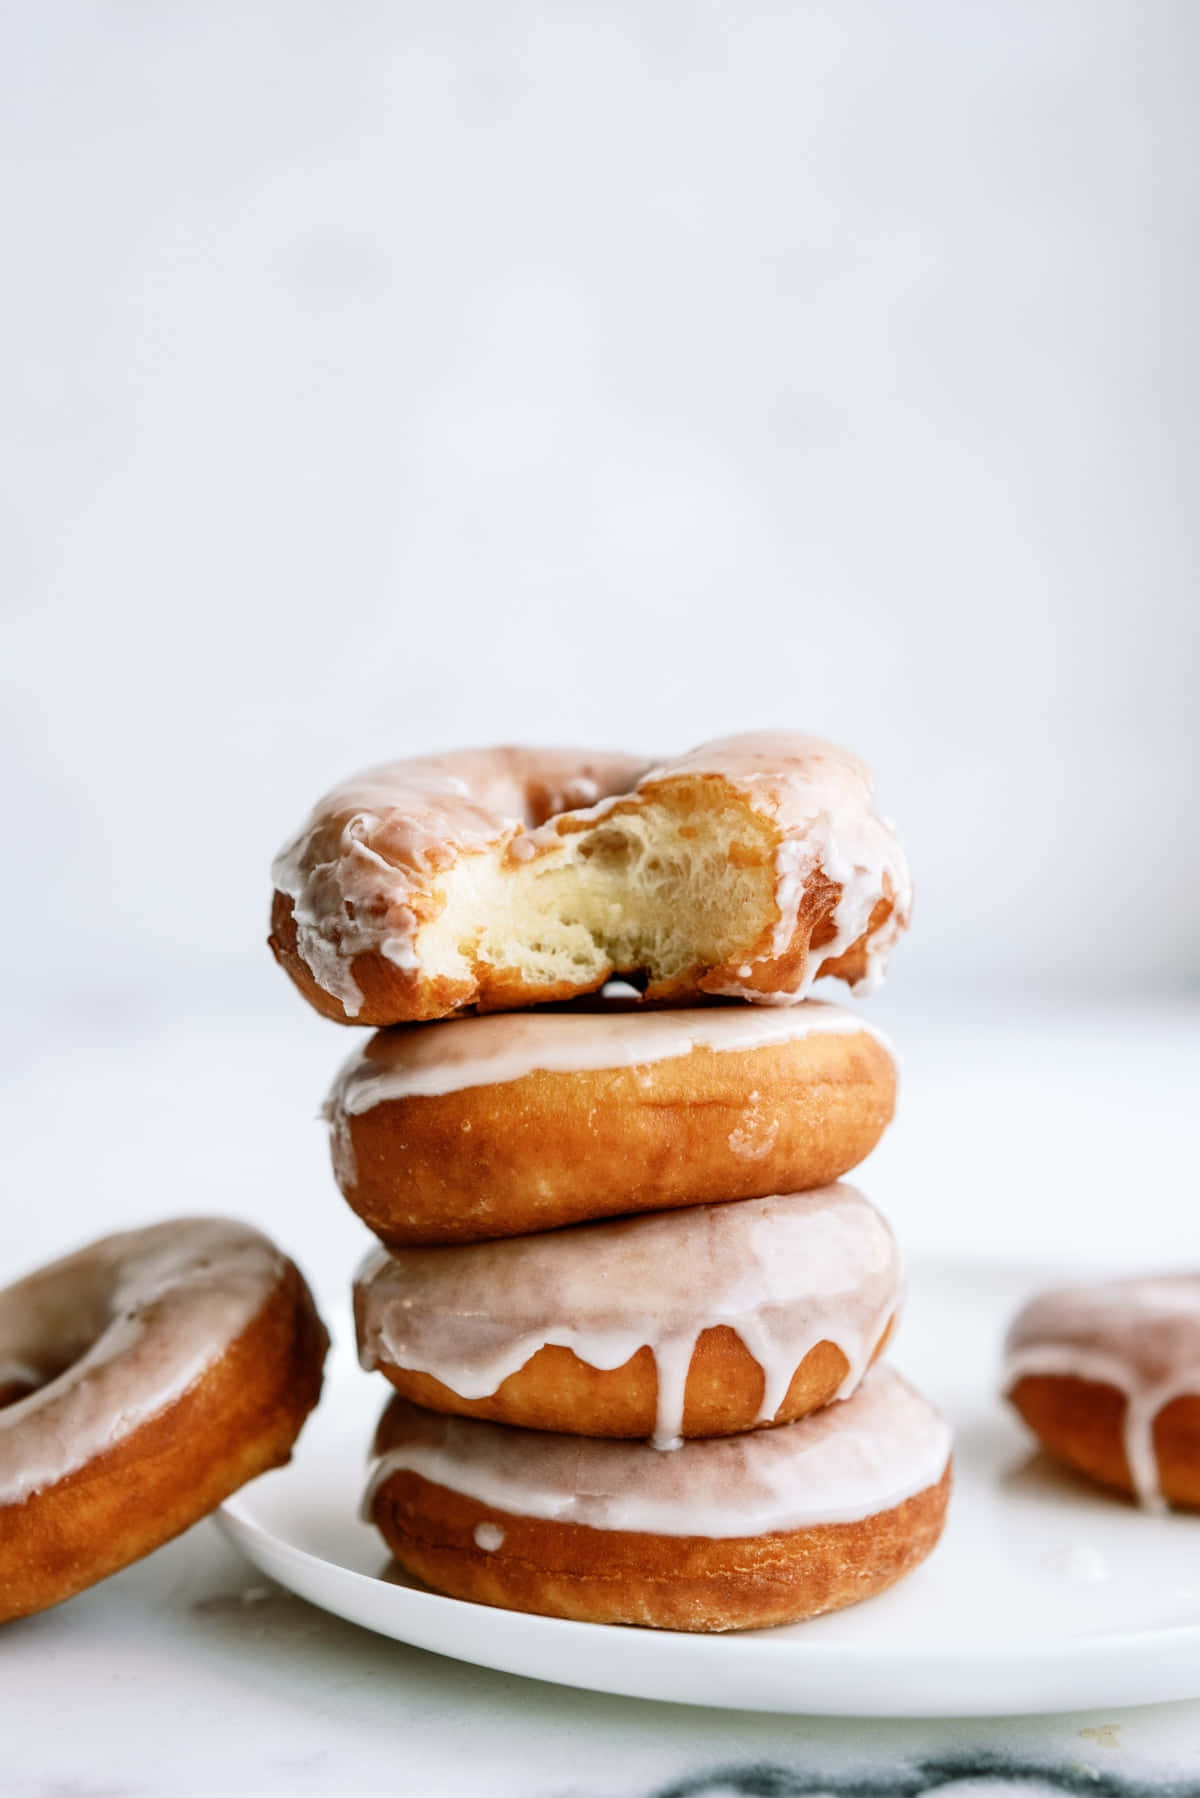 Start your morning with a delicious, glazed donut! Wallpaper